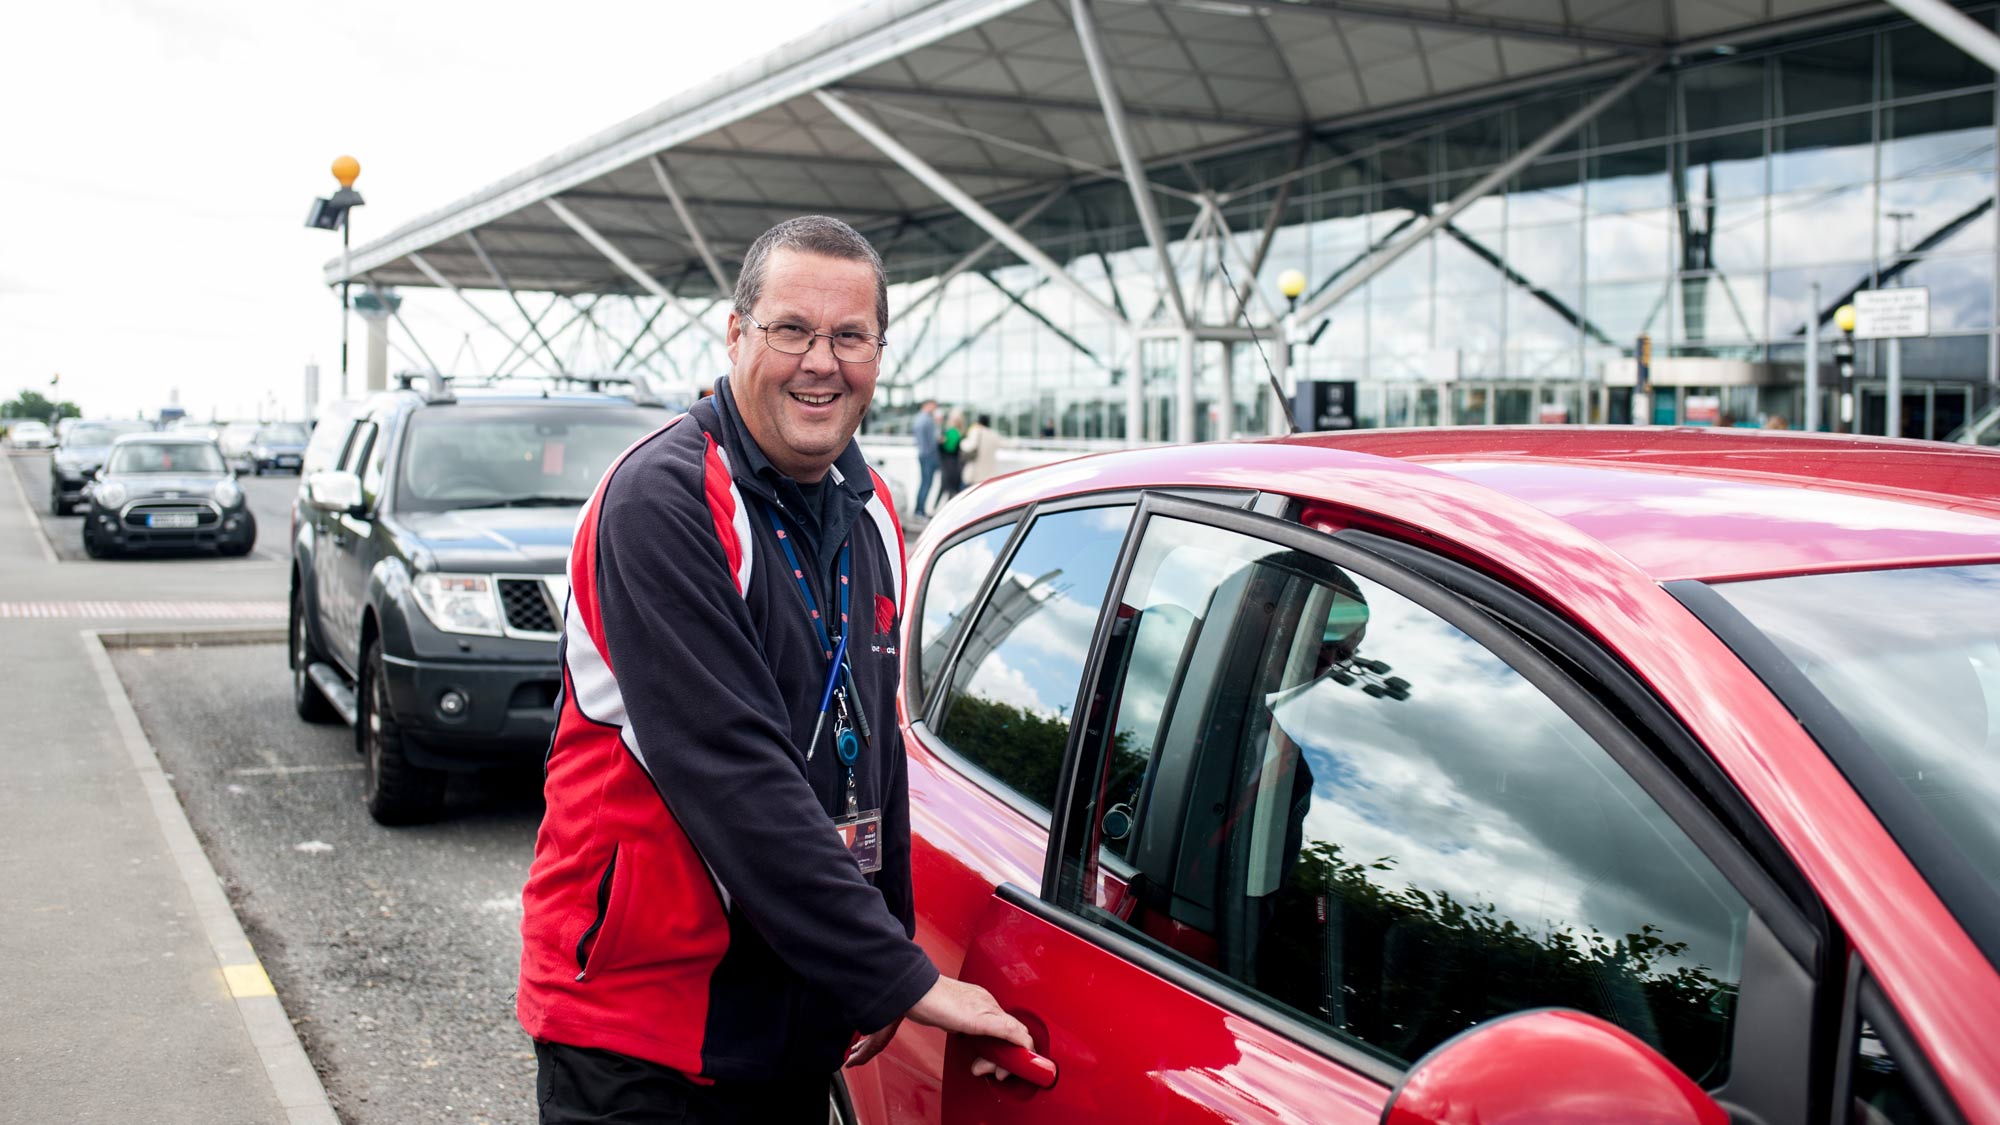 Lee at Stansted collecting a car